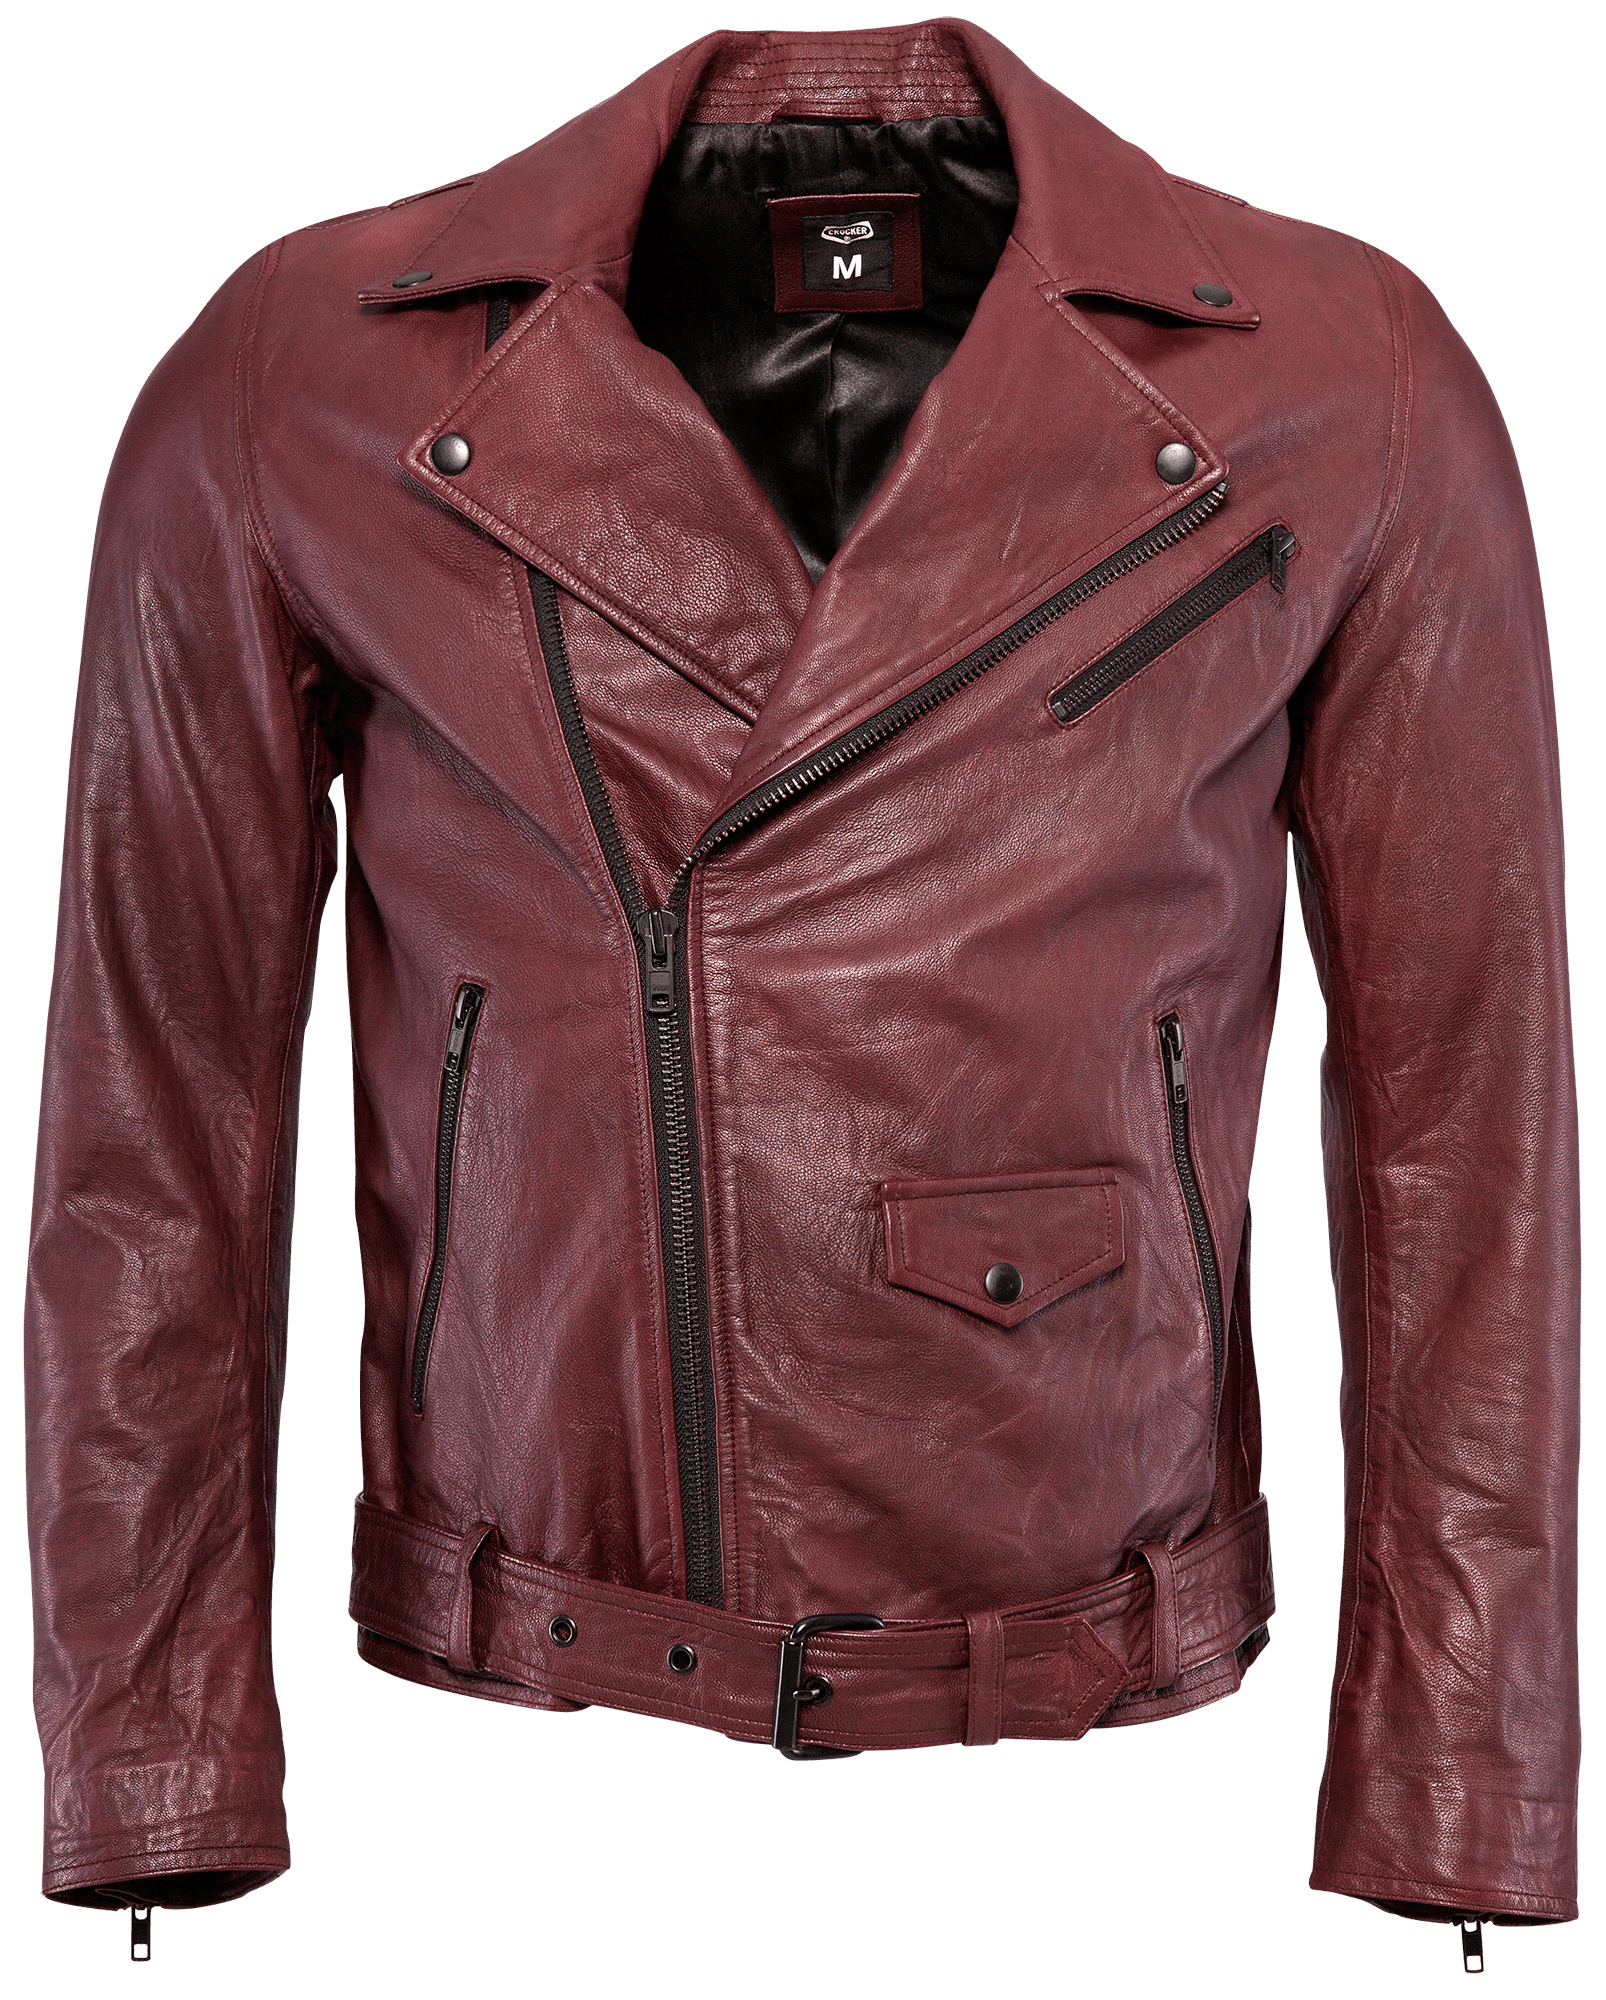 Leather Jacket Casual Free HQ Image PNG Image